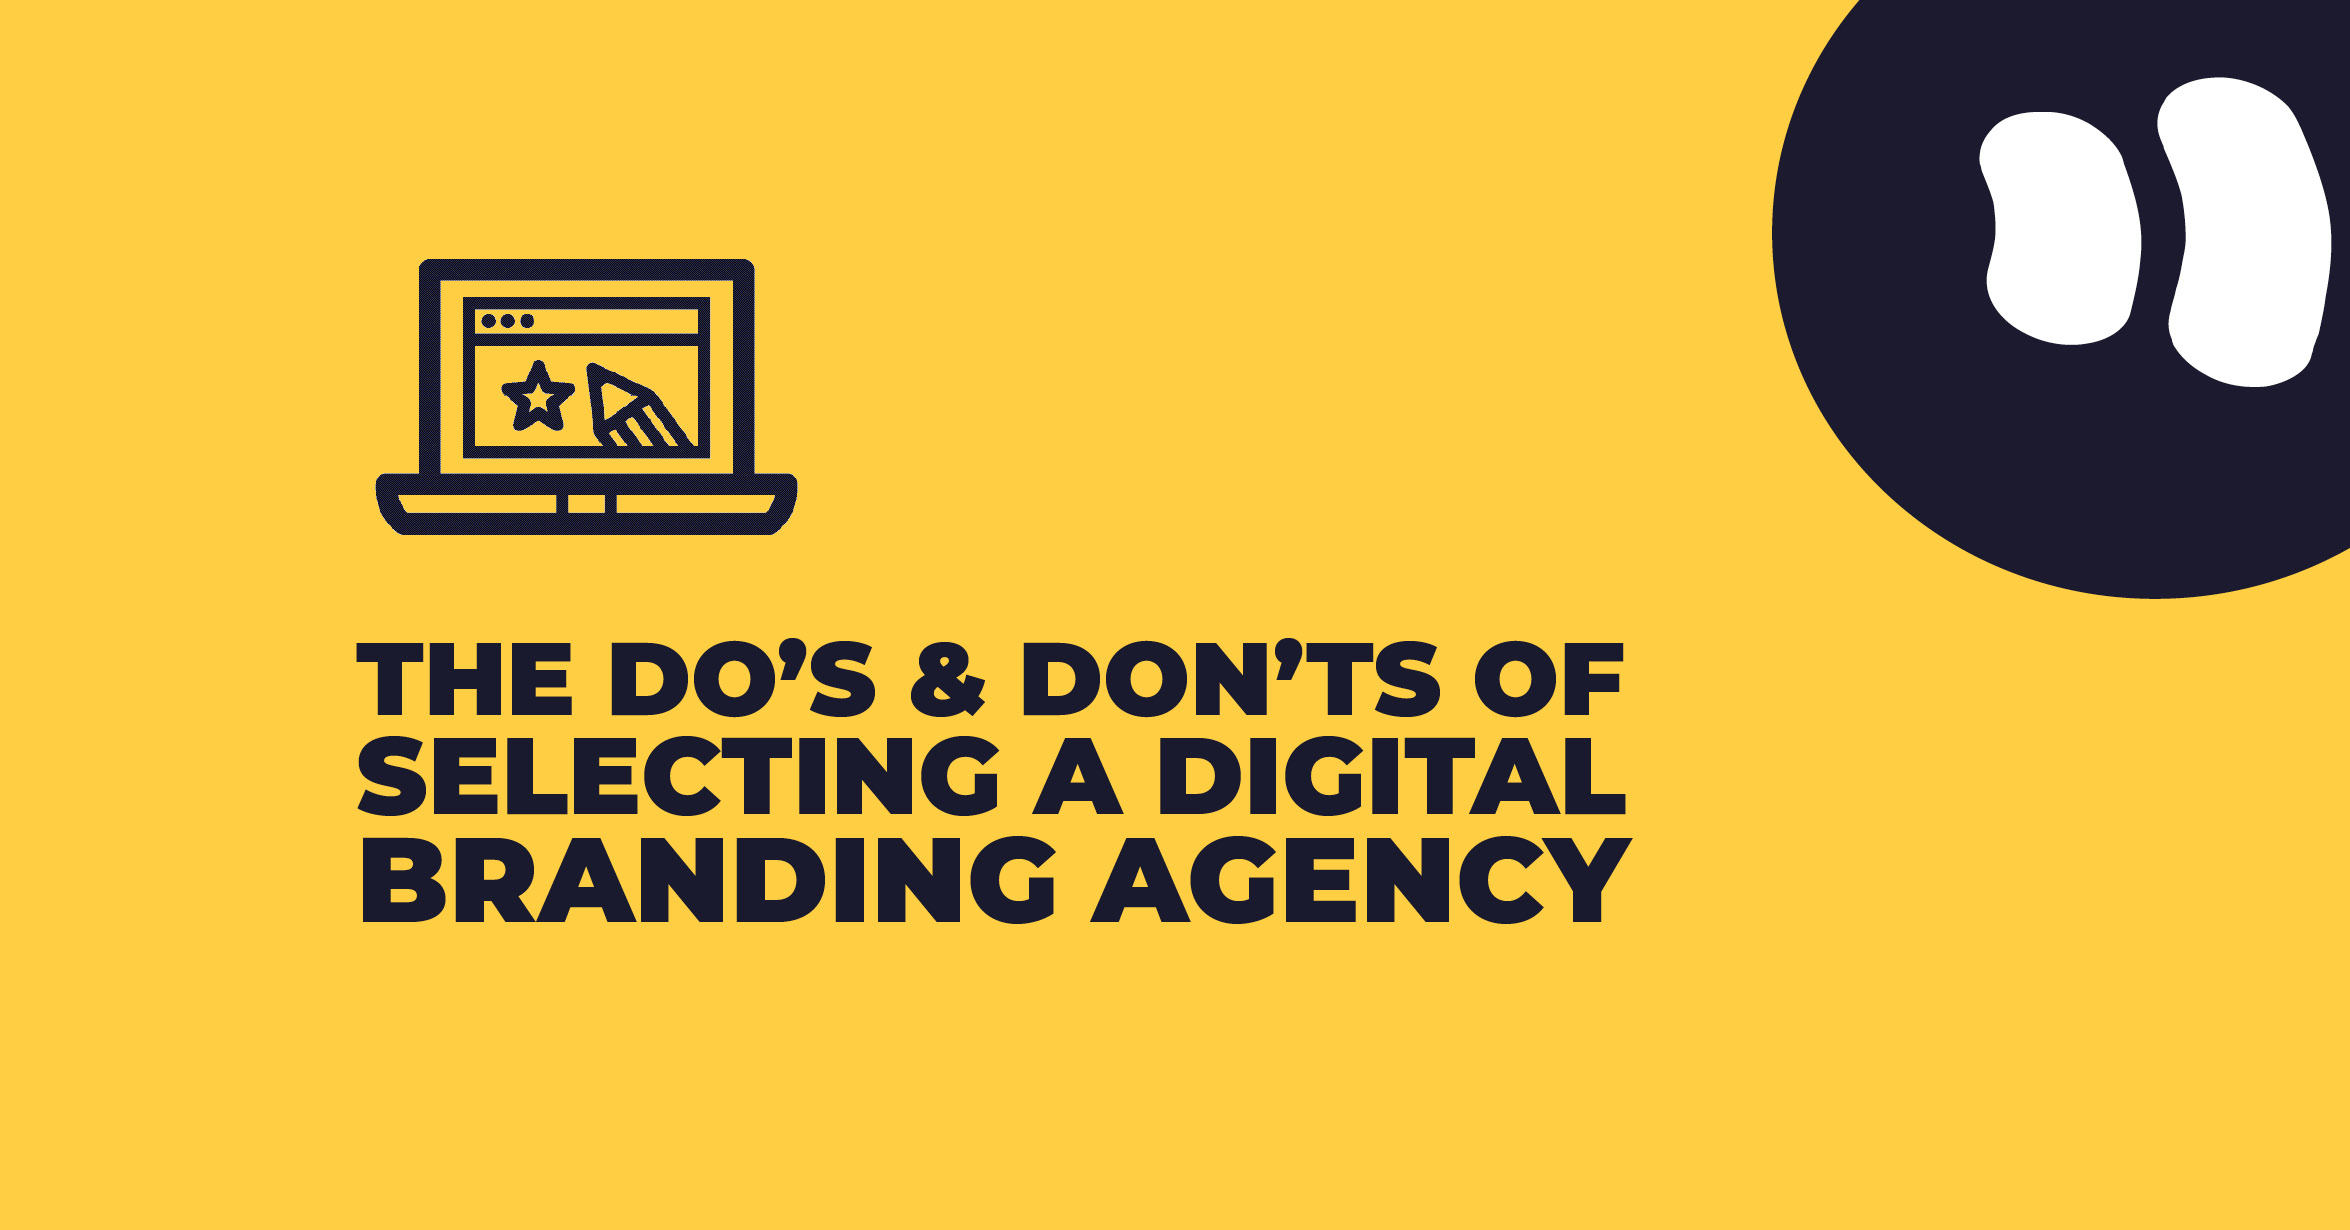 The Do’s and Don’ts of Selecting a Digital Branding Agency